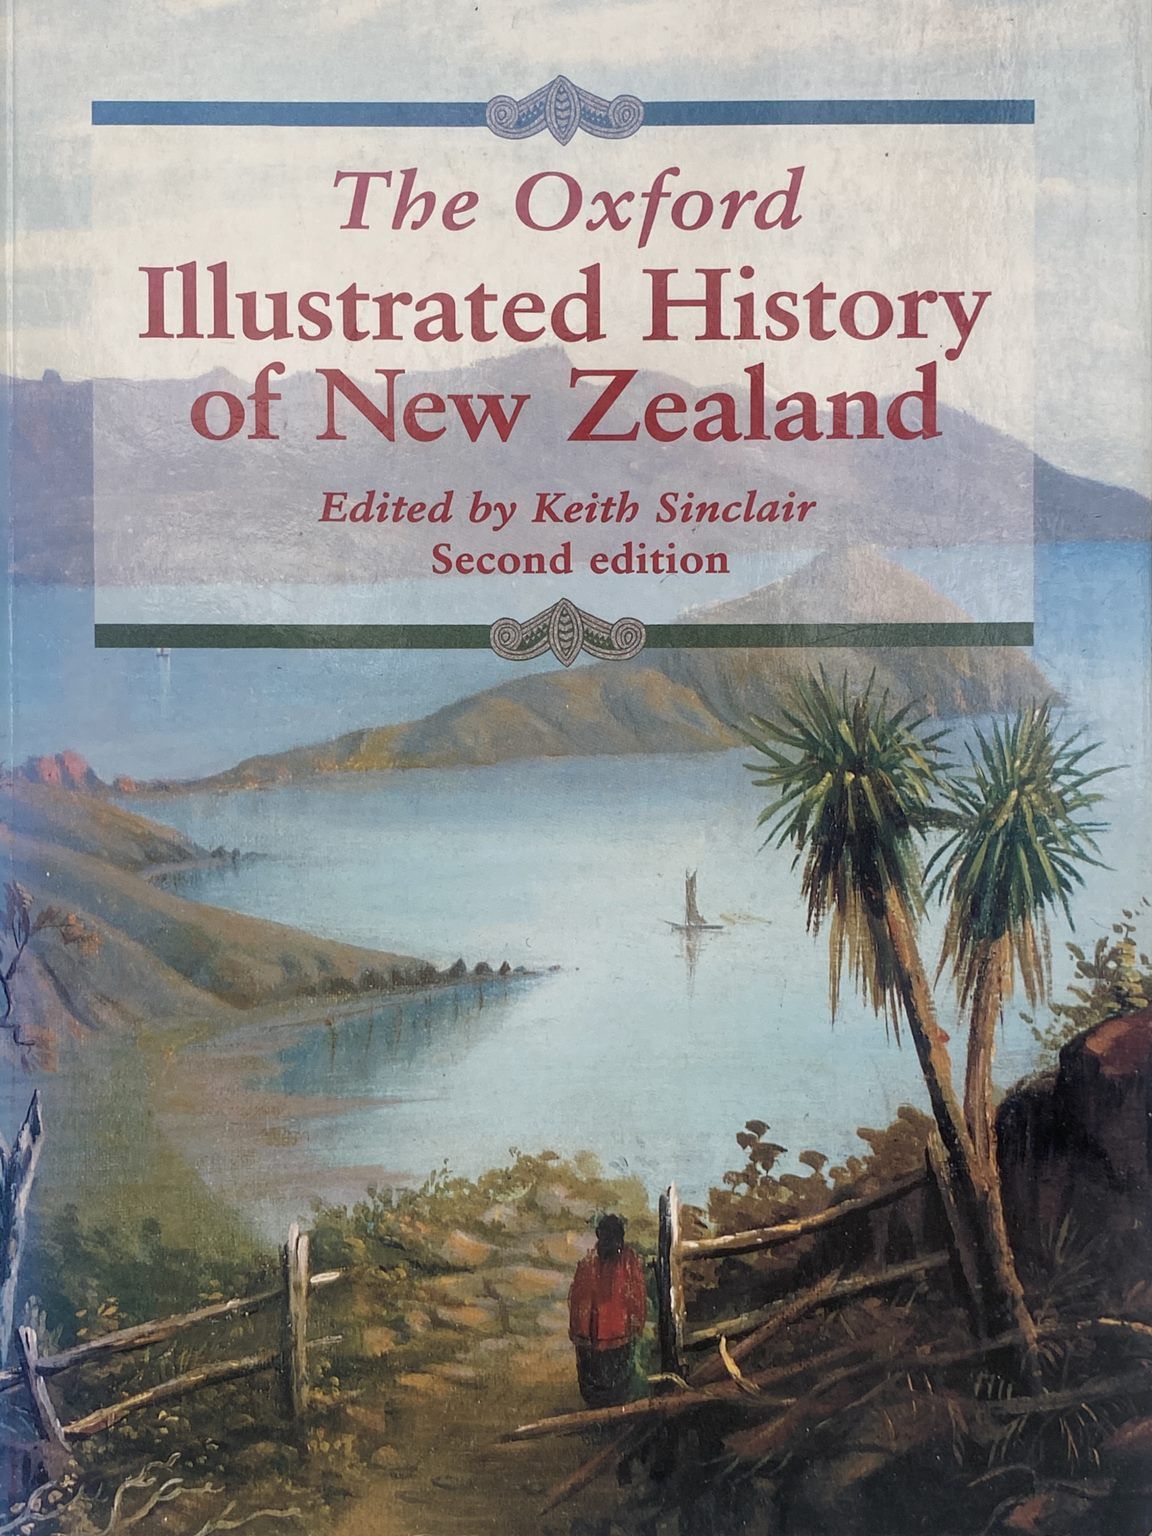 The Oxford ILLUSTRATED HISTORY OF NEW ZEALAND